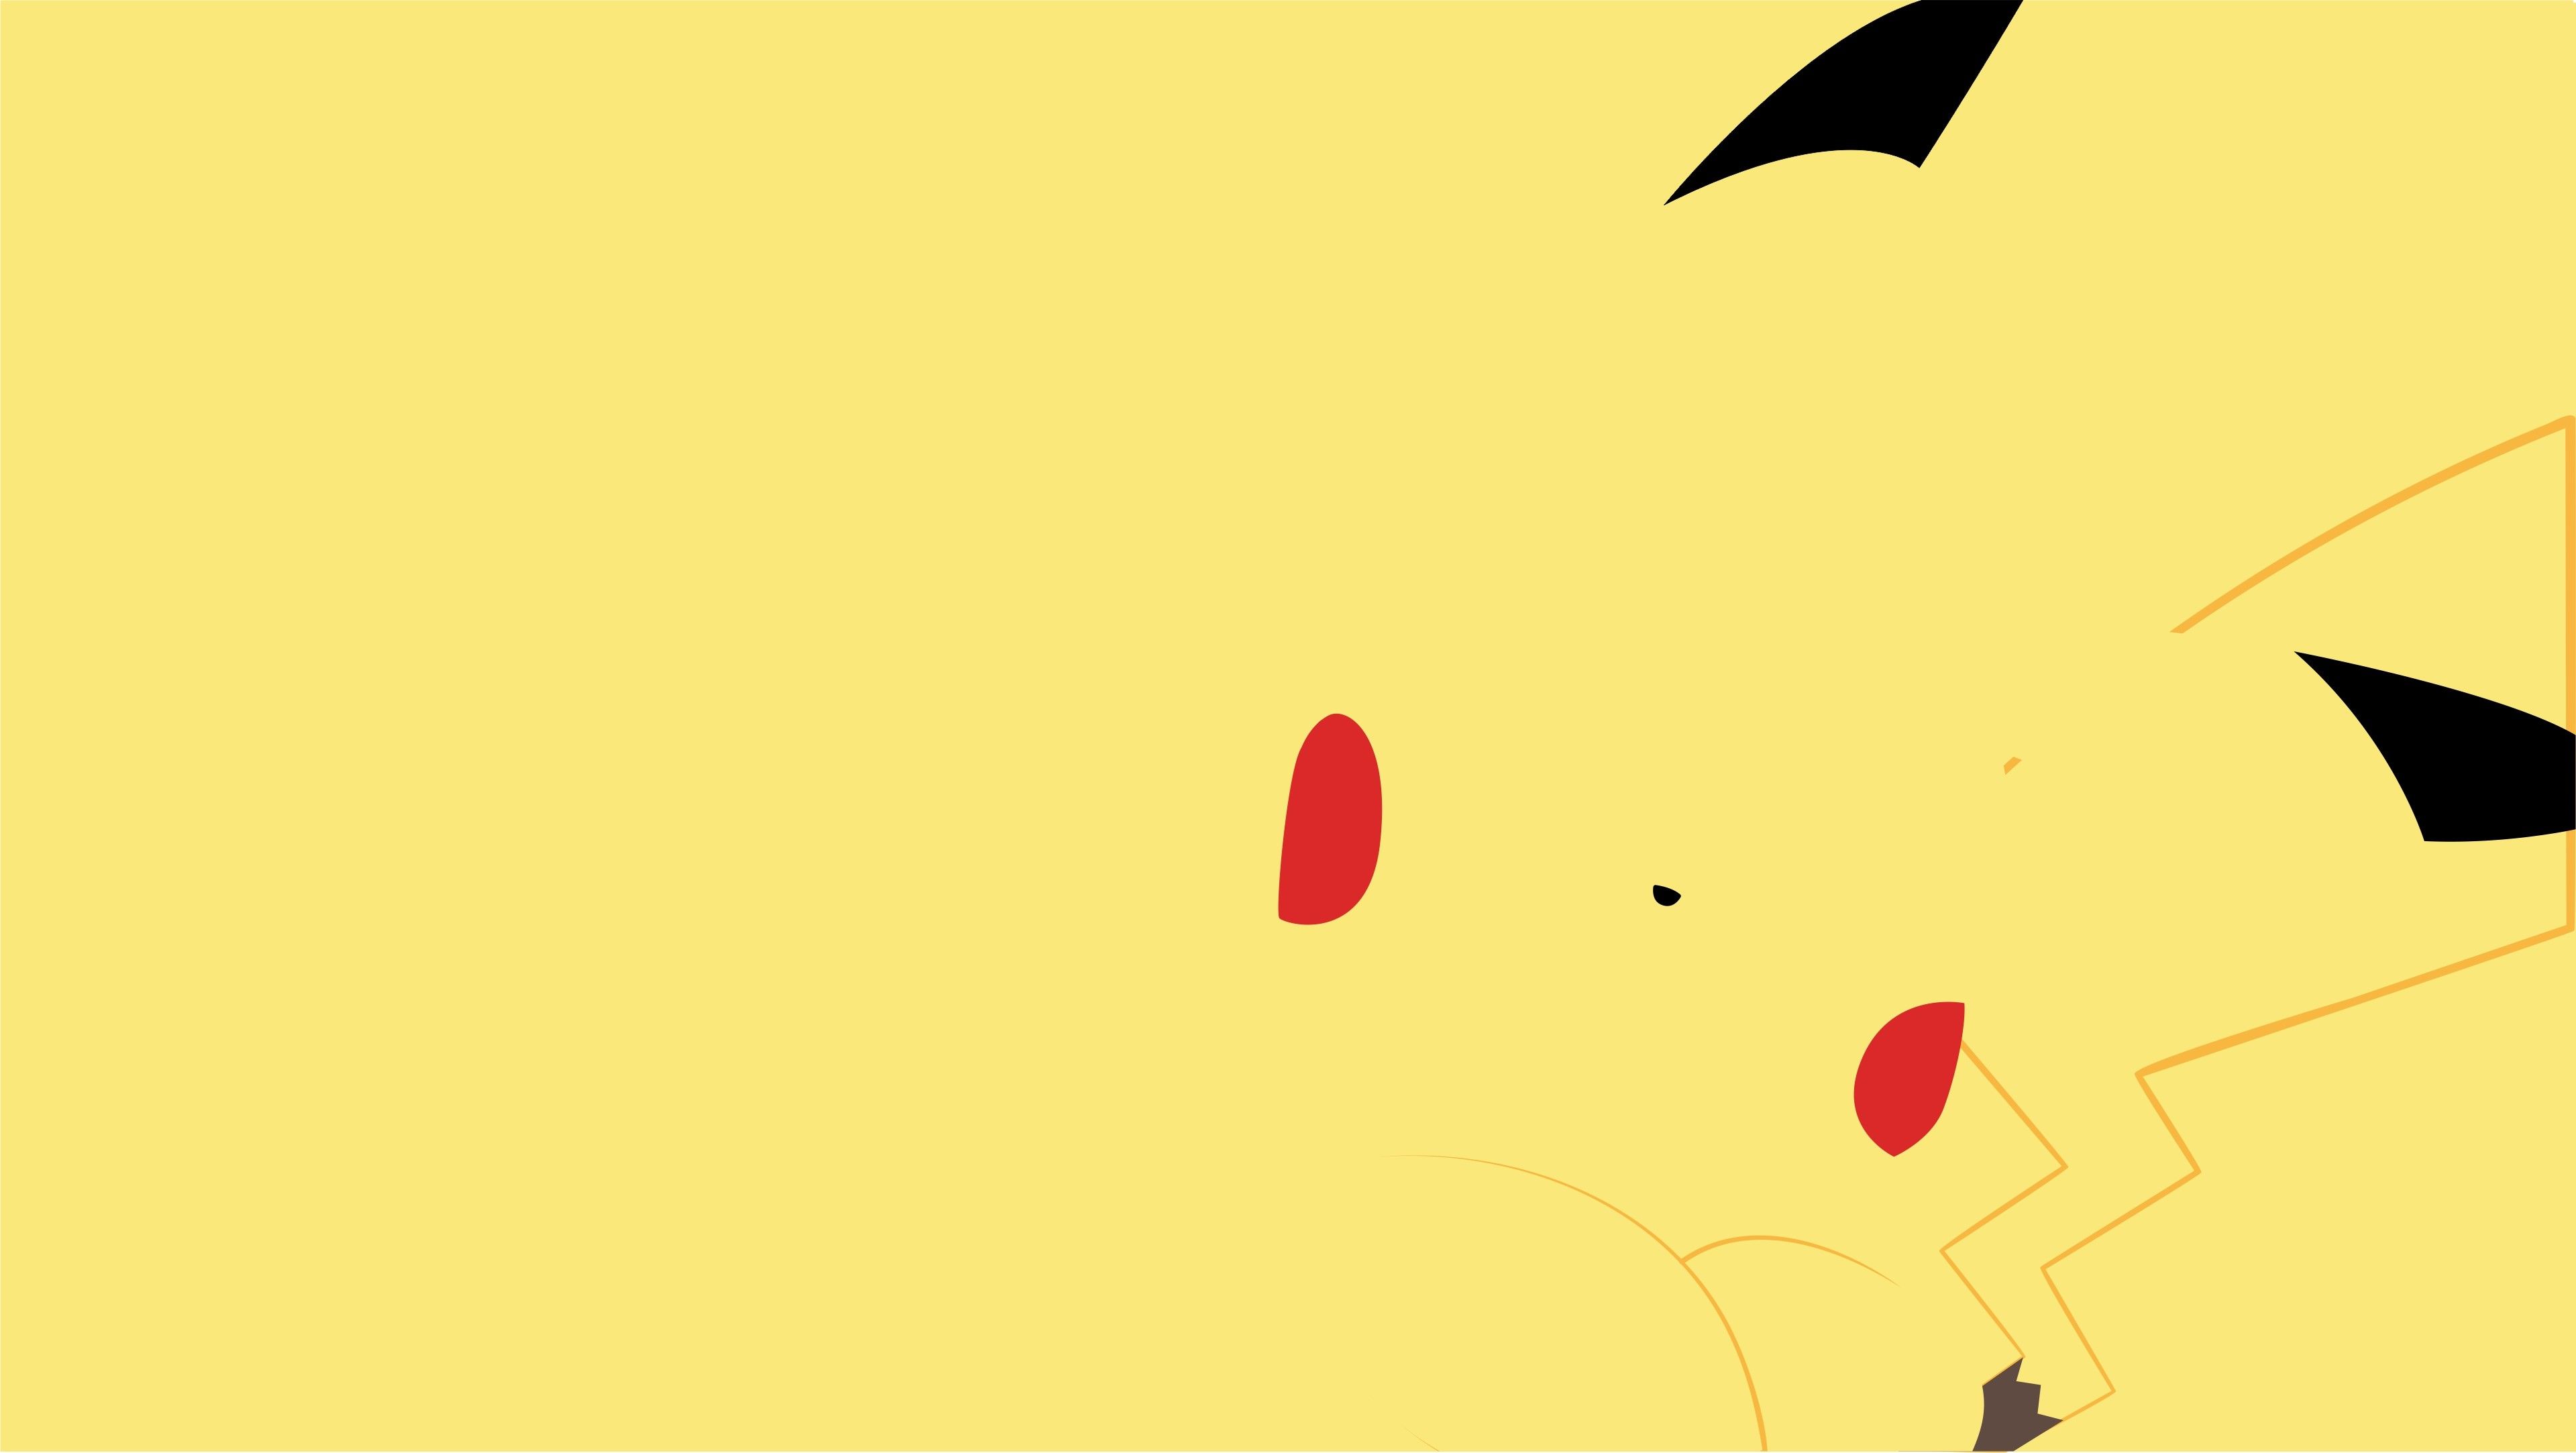 A yellow and black pikachu with red eyes - Pikachu